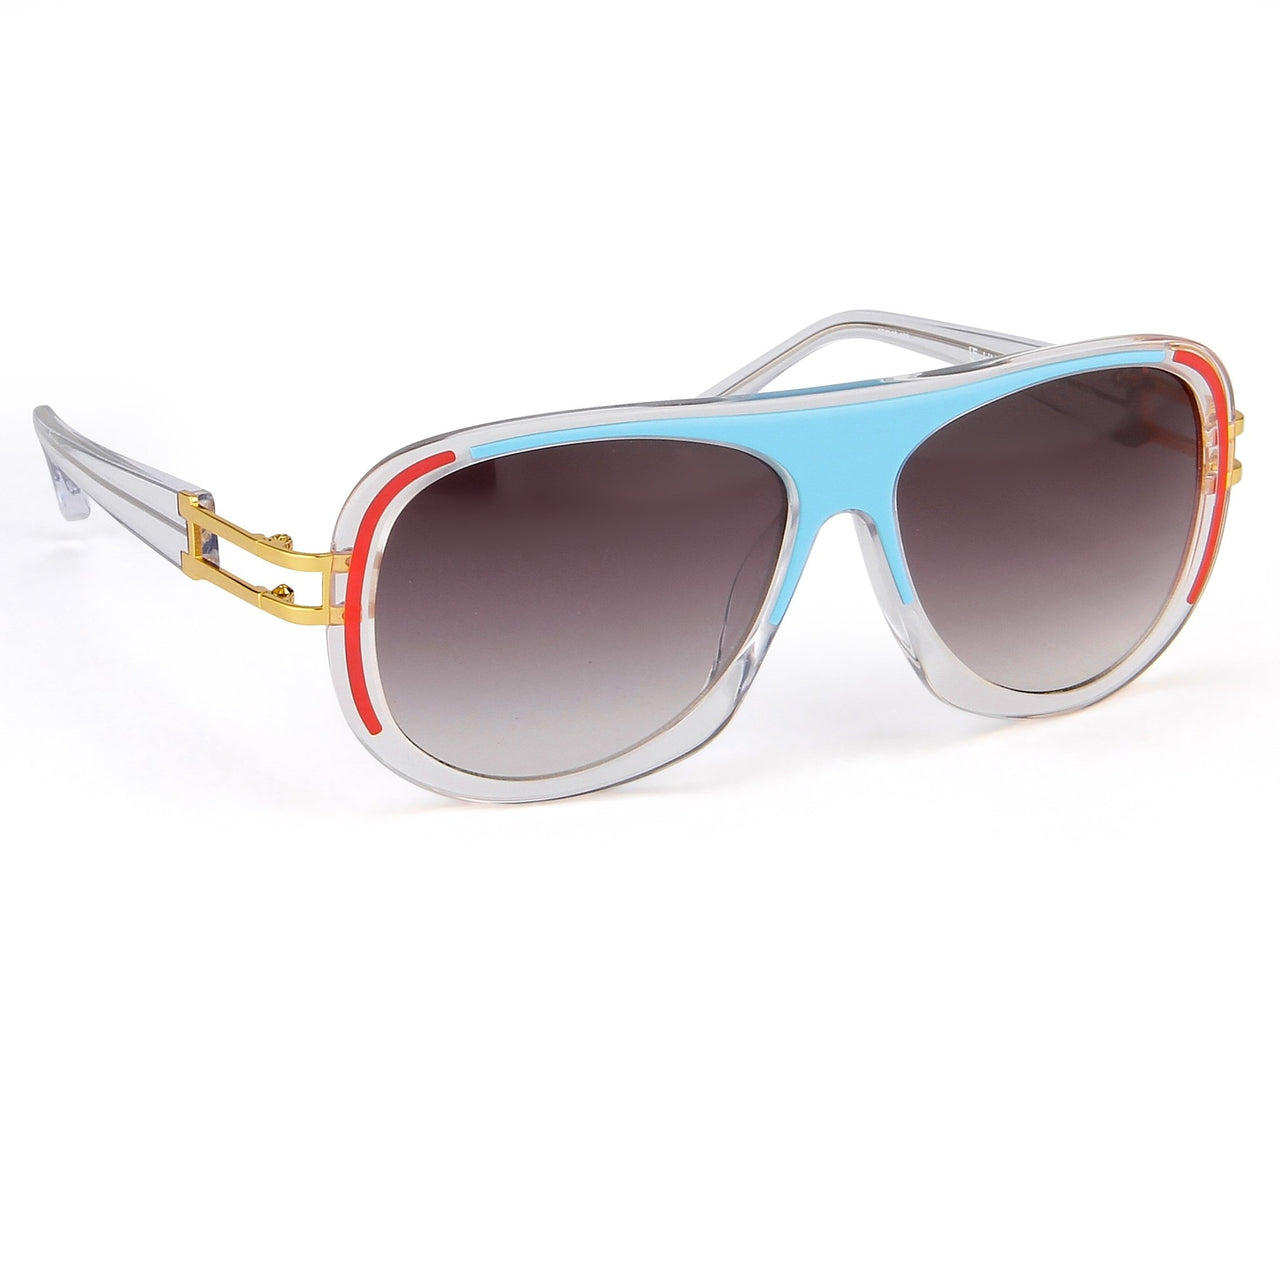 Prabal Gurung Sunglasses Female Aviator Blue/Red and Clear Acetate CAT 3 Grey Lenses PG10C2SUN - Watches & Crystals